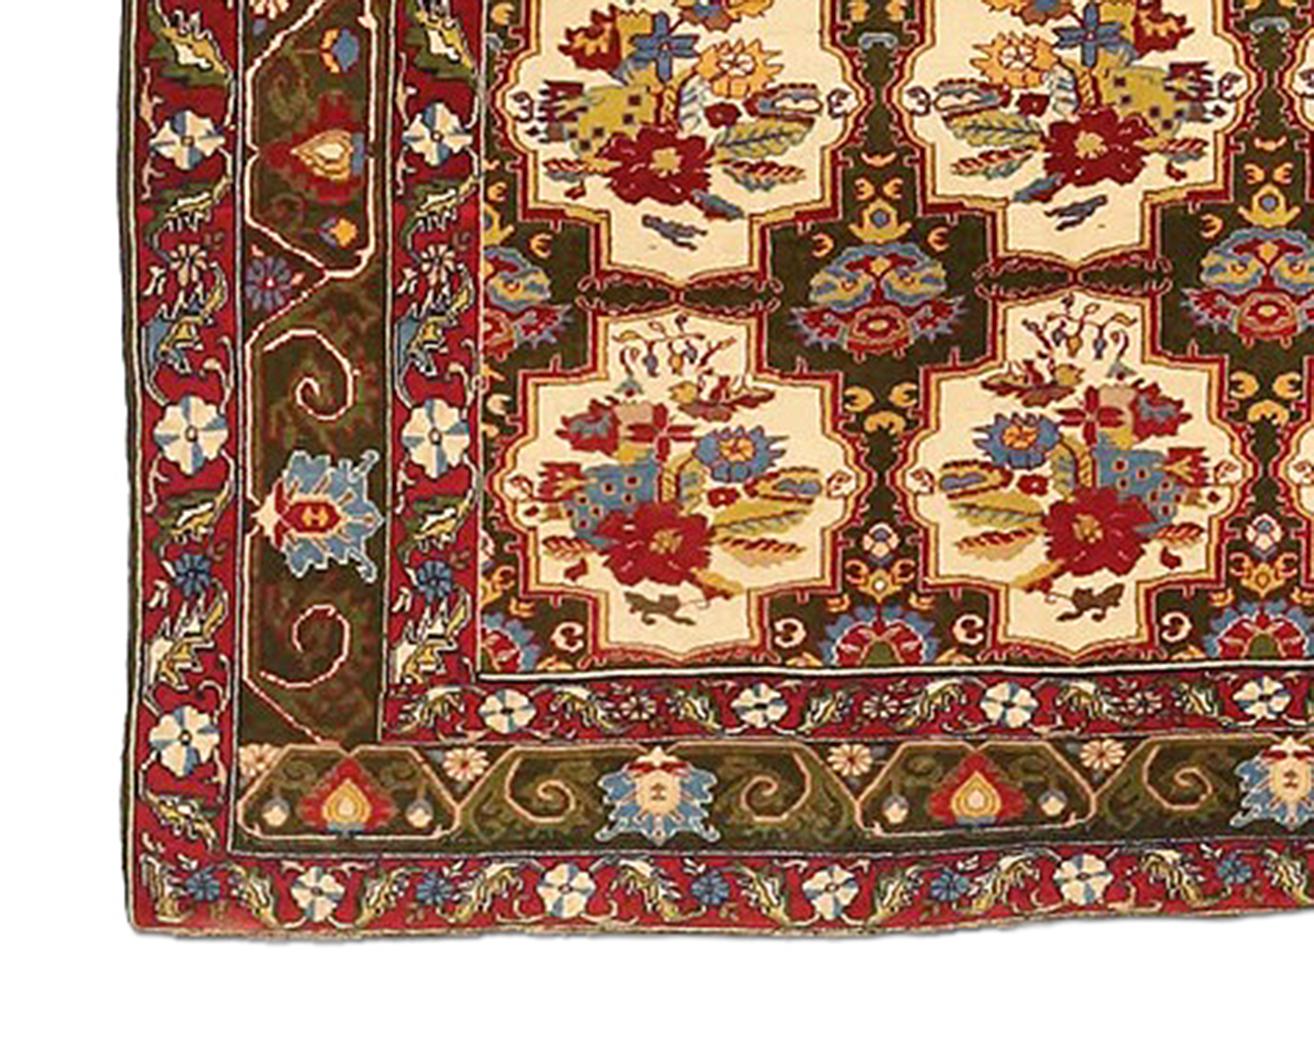 Hand-Woven Antique Indian Rug with Red, Gold & Blue Floral Details For Sale